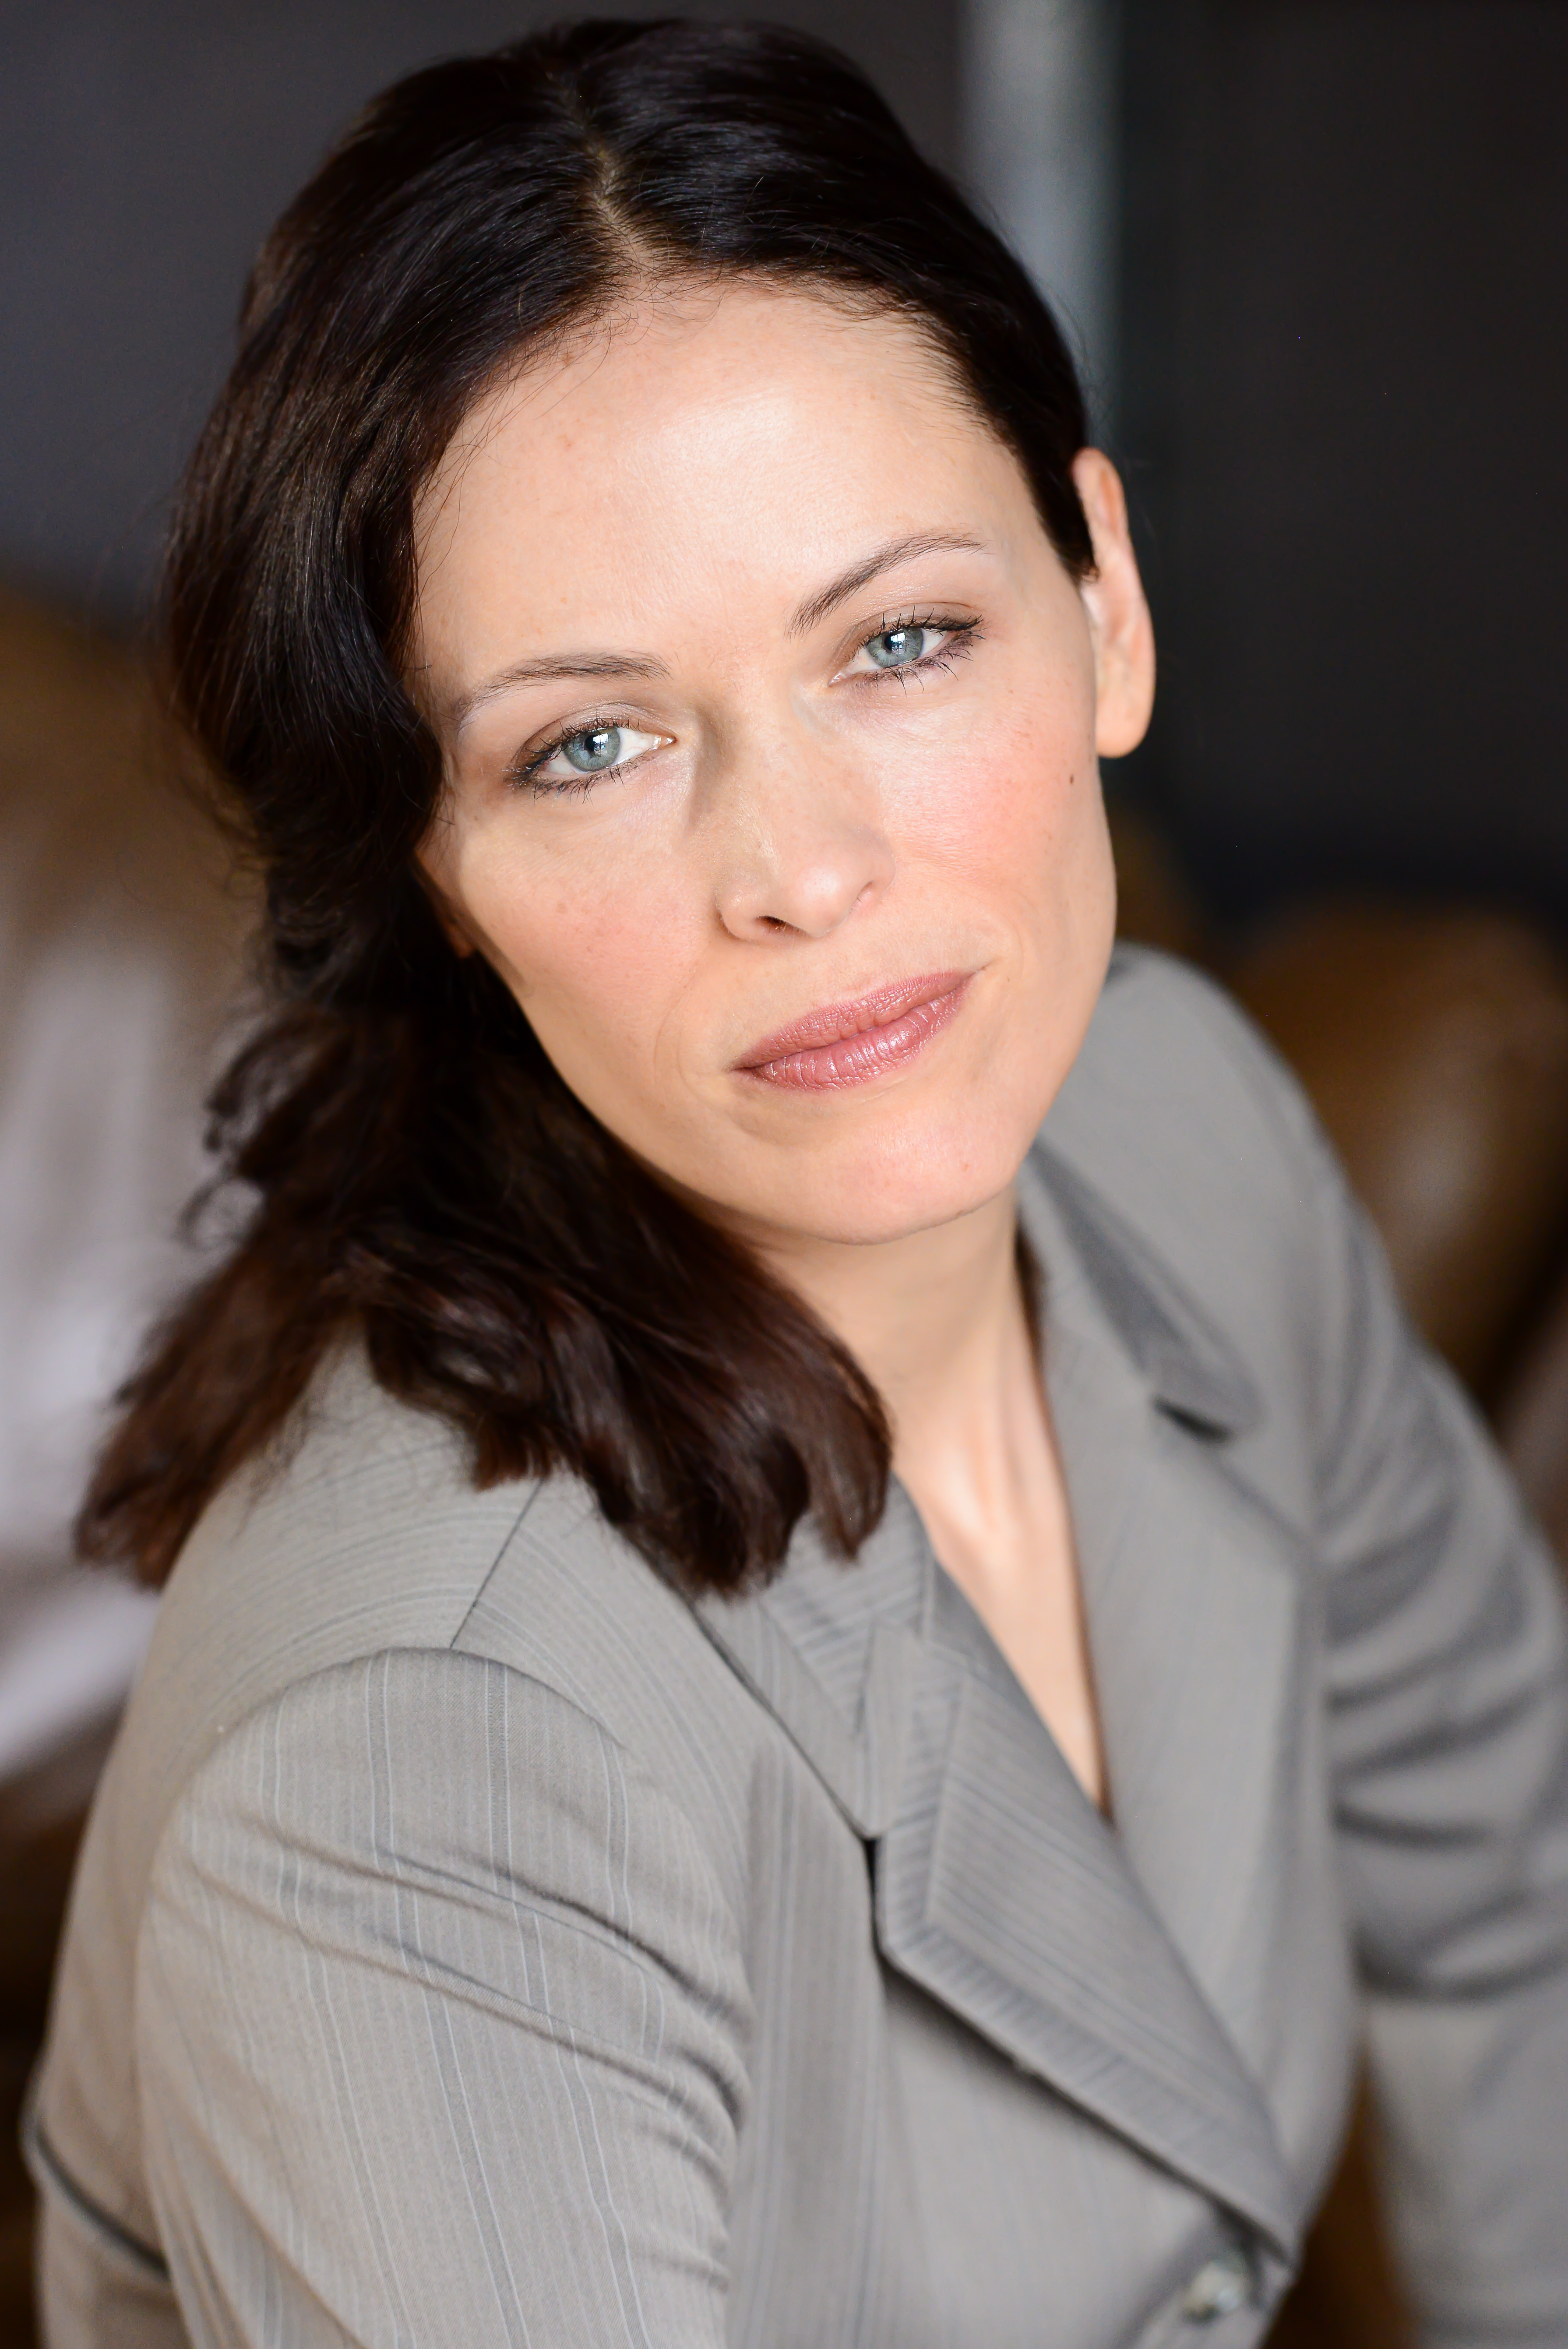 Film/ TV headshot - Lawyer, business woman, doctor. Strong woman with a vulnerable side.